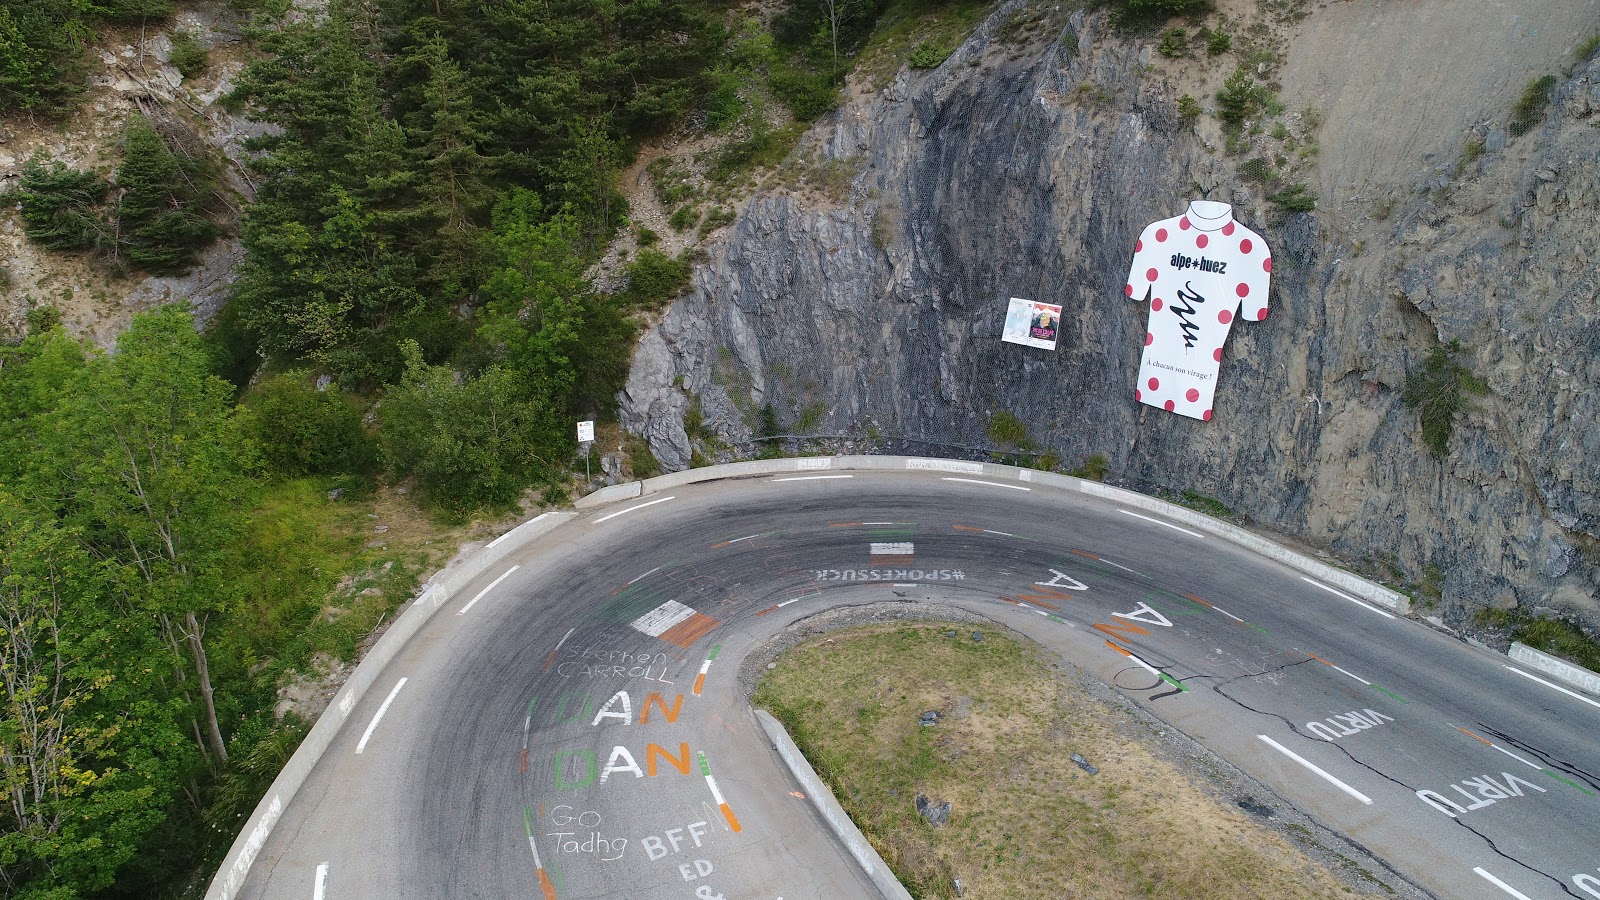 Bike climb Alpe d'Huez - turn (tornante) 10 aerial drone photo of mountain stage leader poster on wall and hairpin curve.